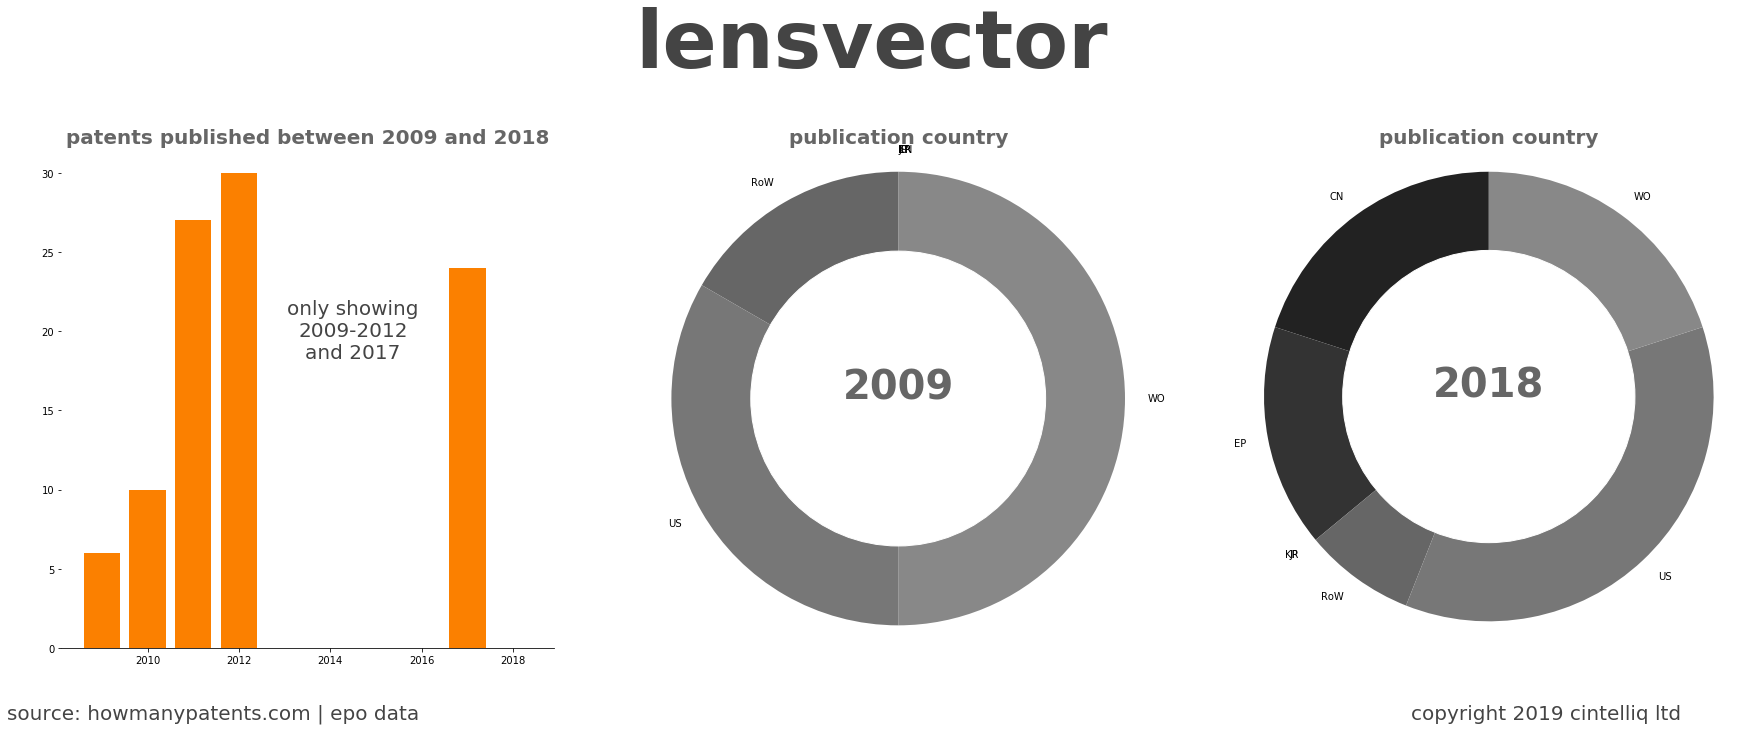 summary of patents for Lensvector